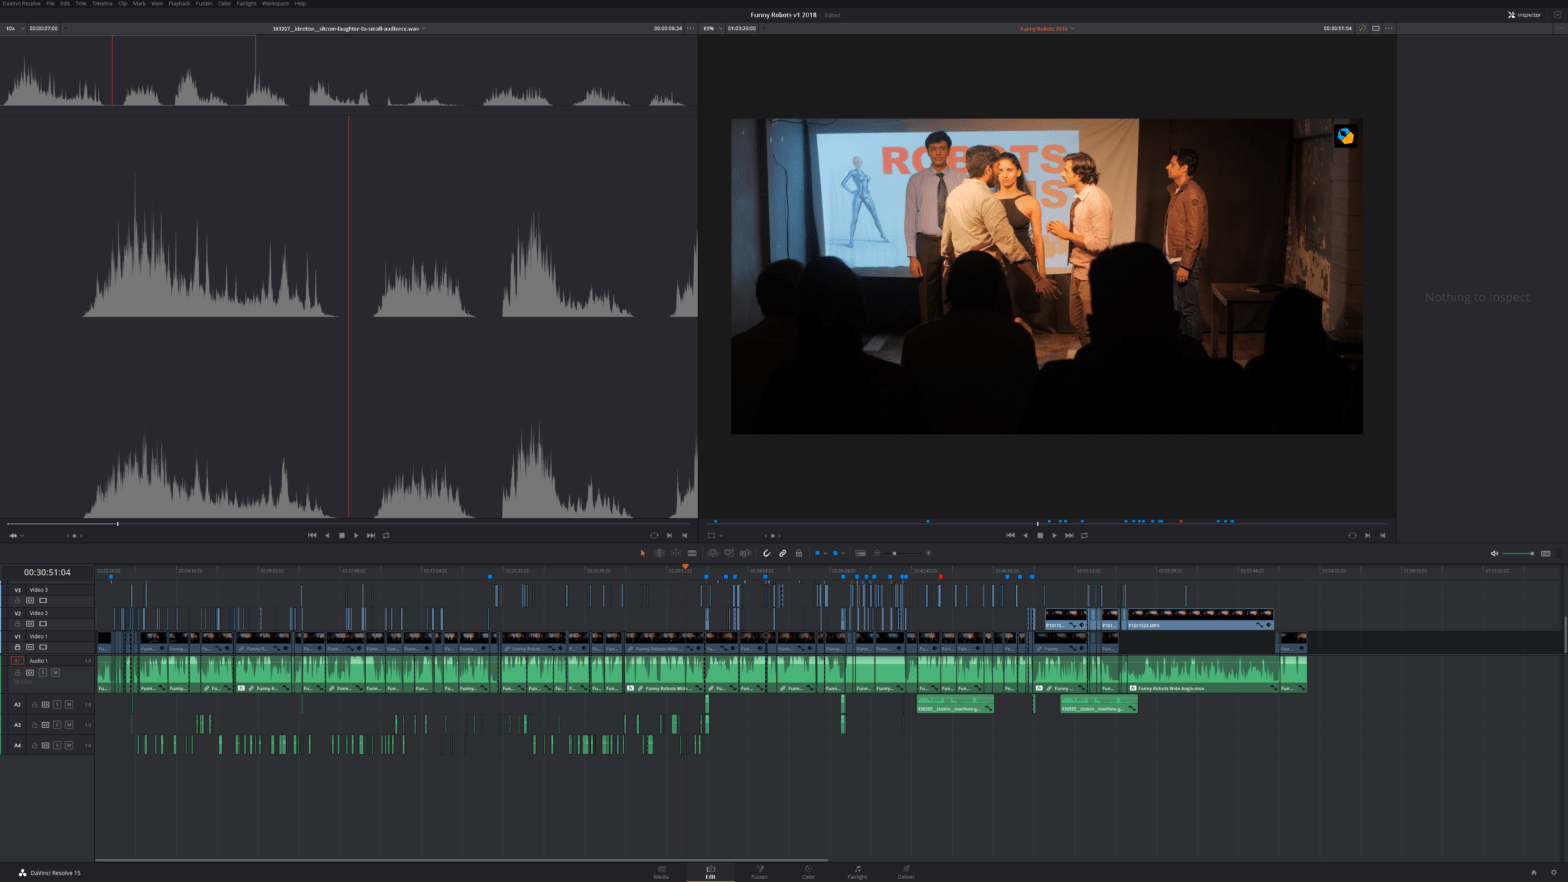 An Overview of the different Stages of Post Production